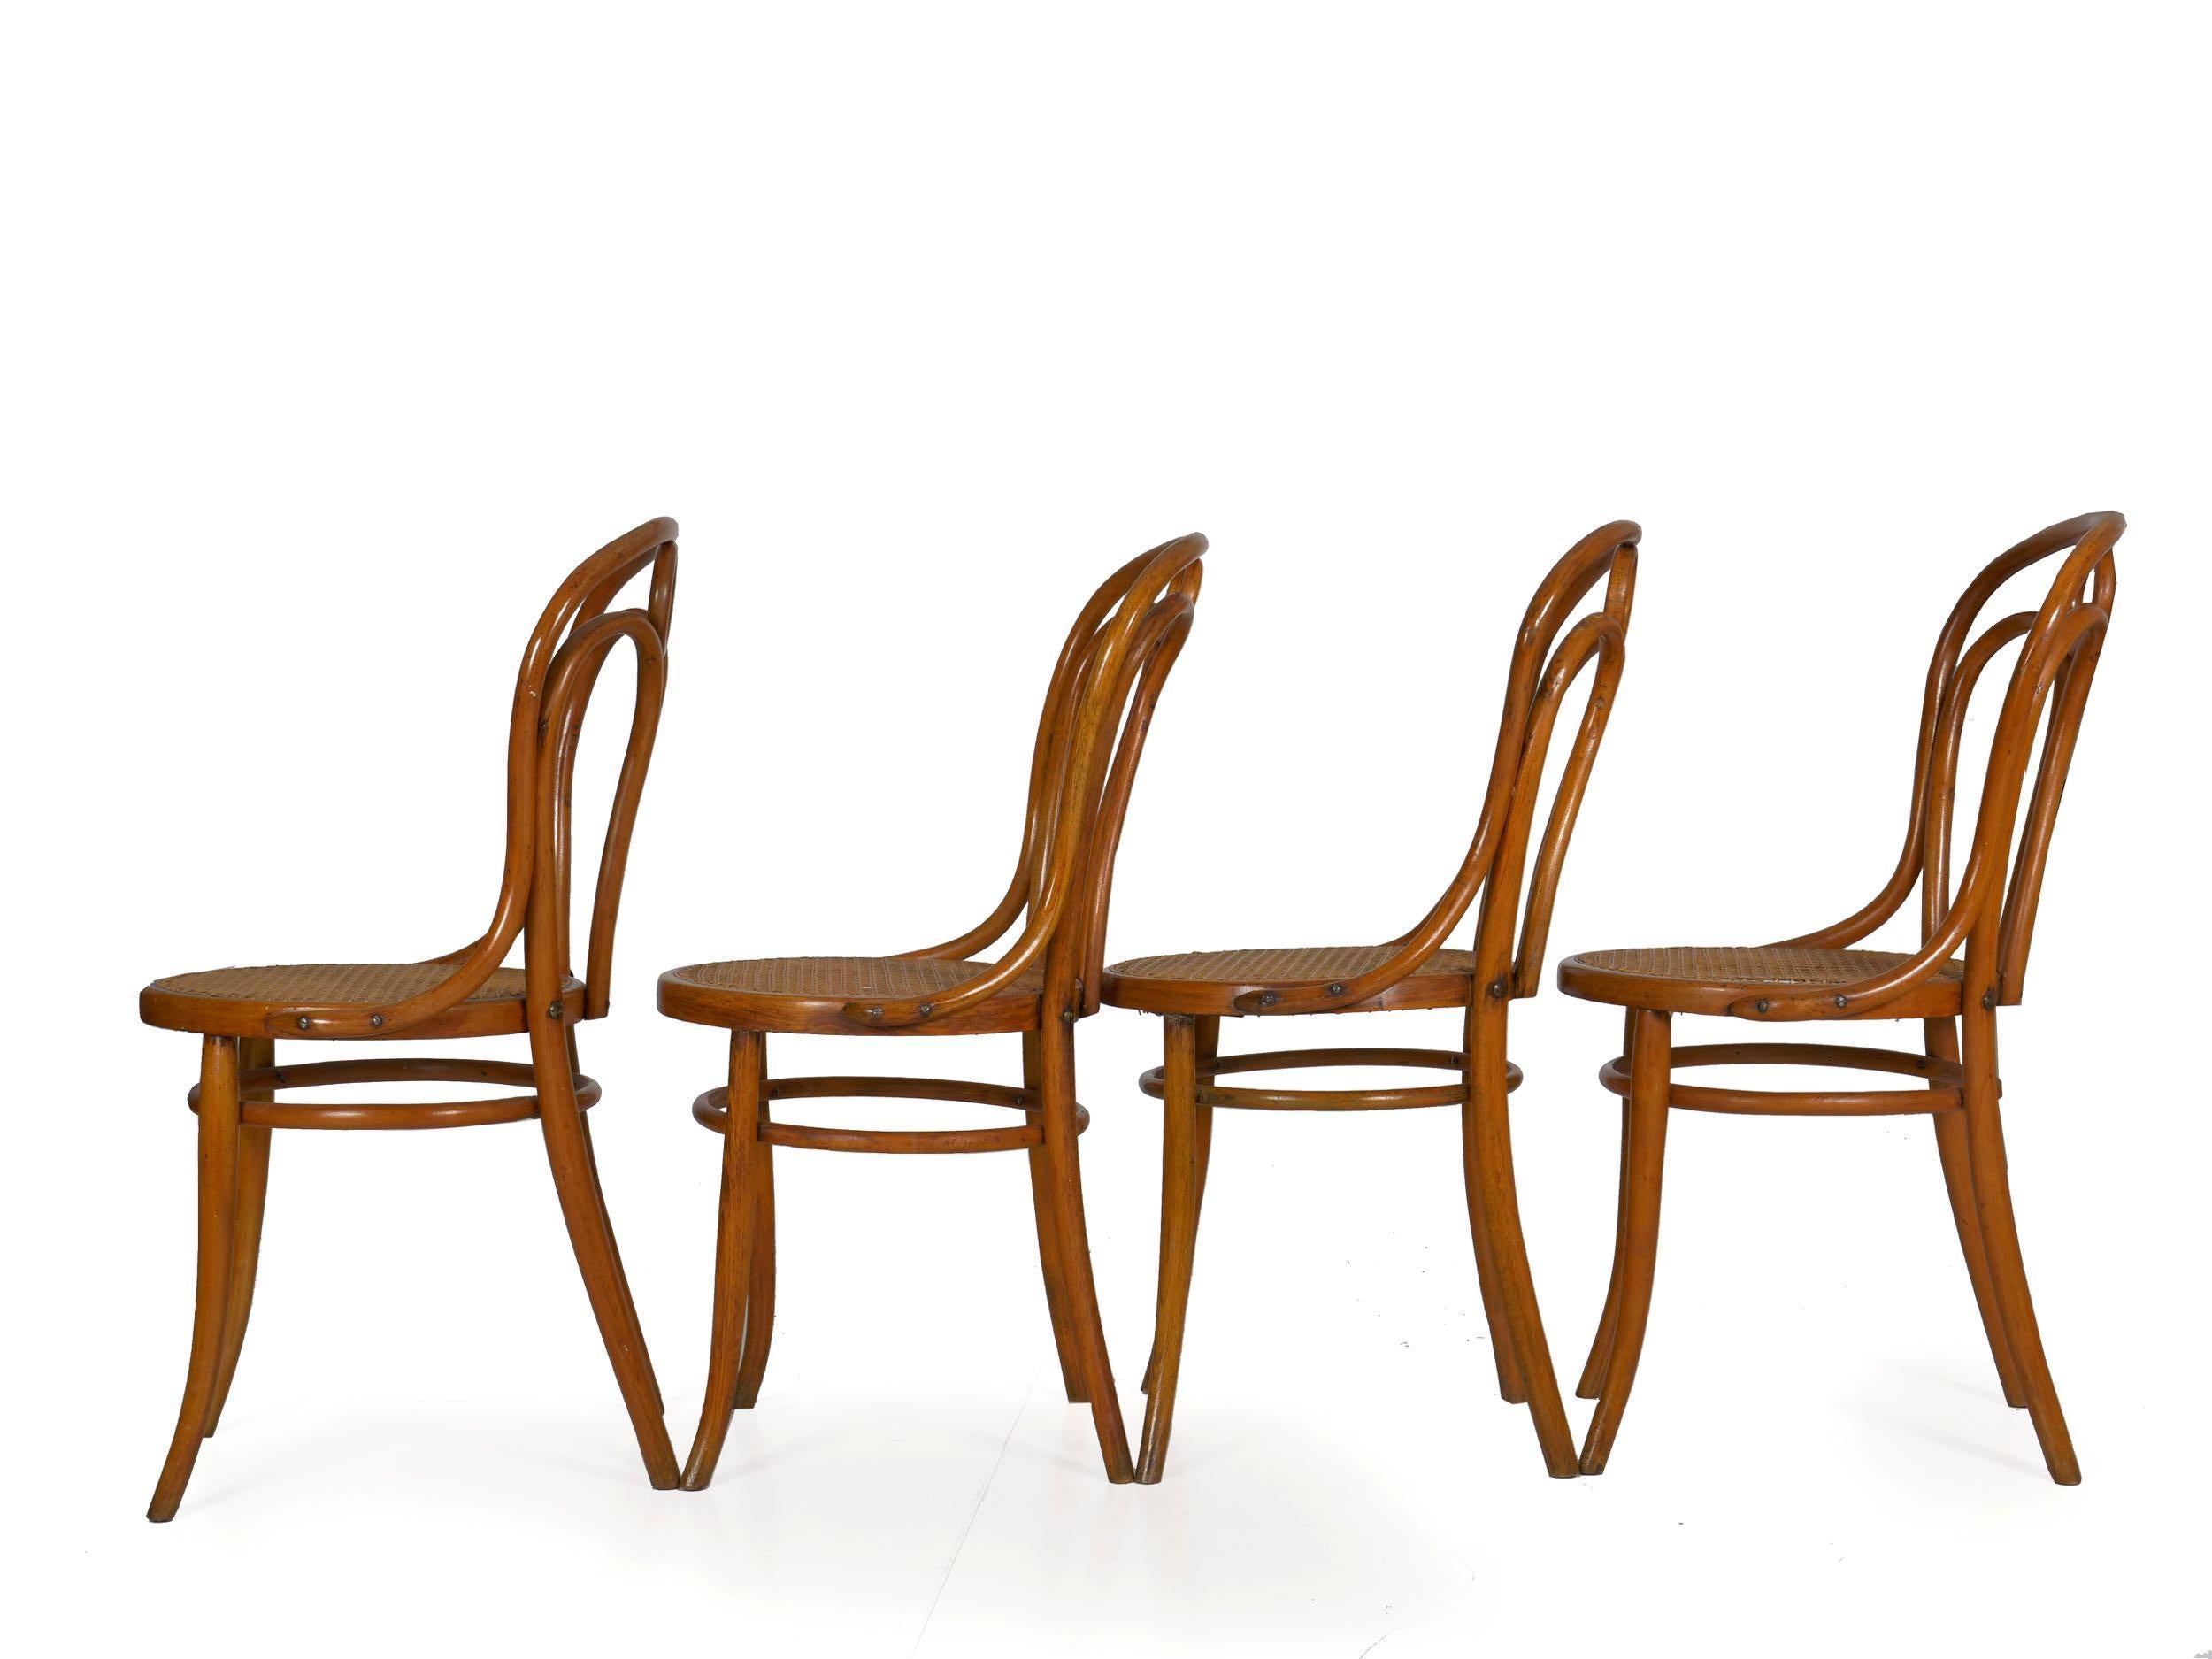 Cane Set of Four Austrian Bentwood Vintage “Angel Chairs” No. 36 by Josef Kohn